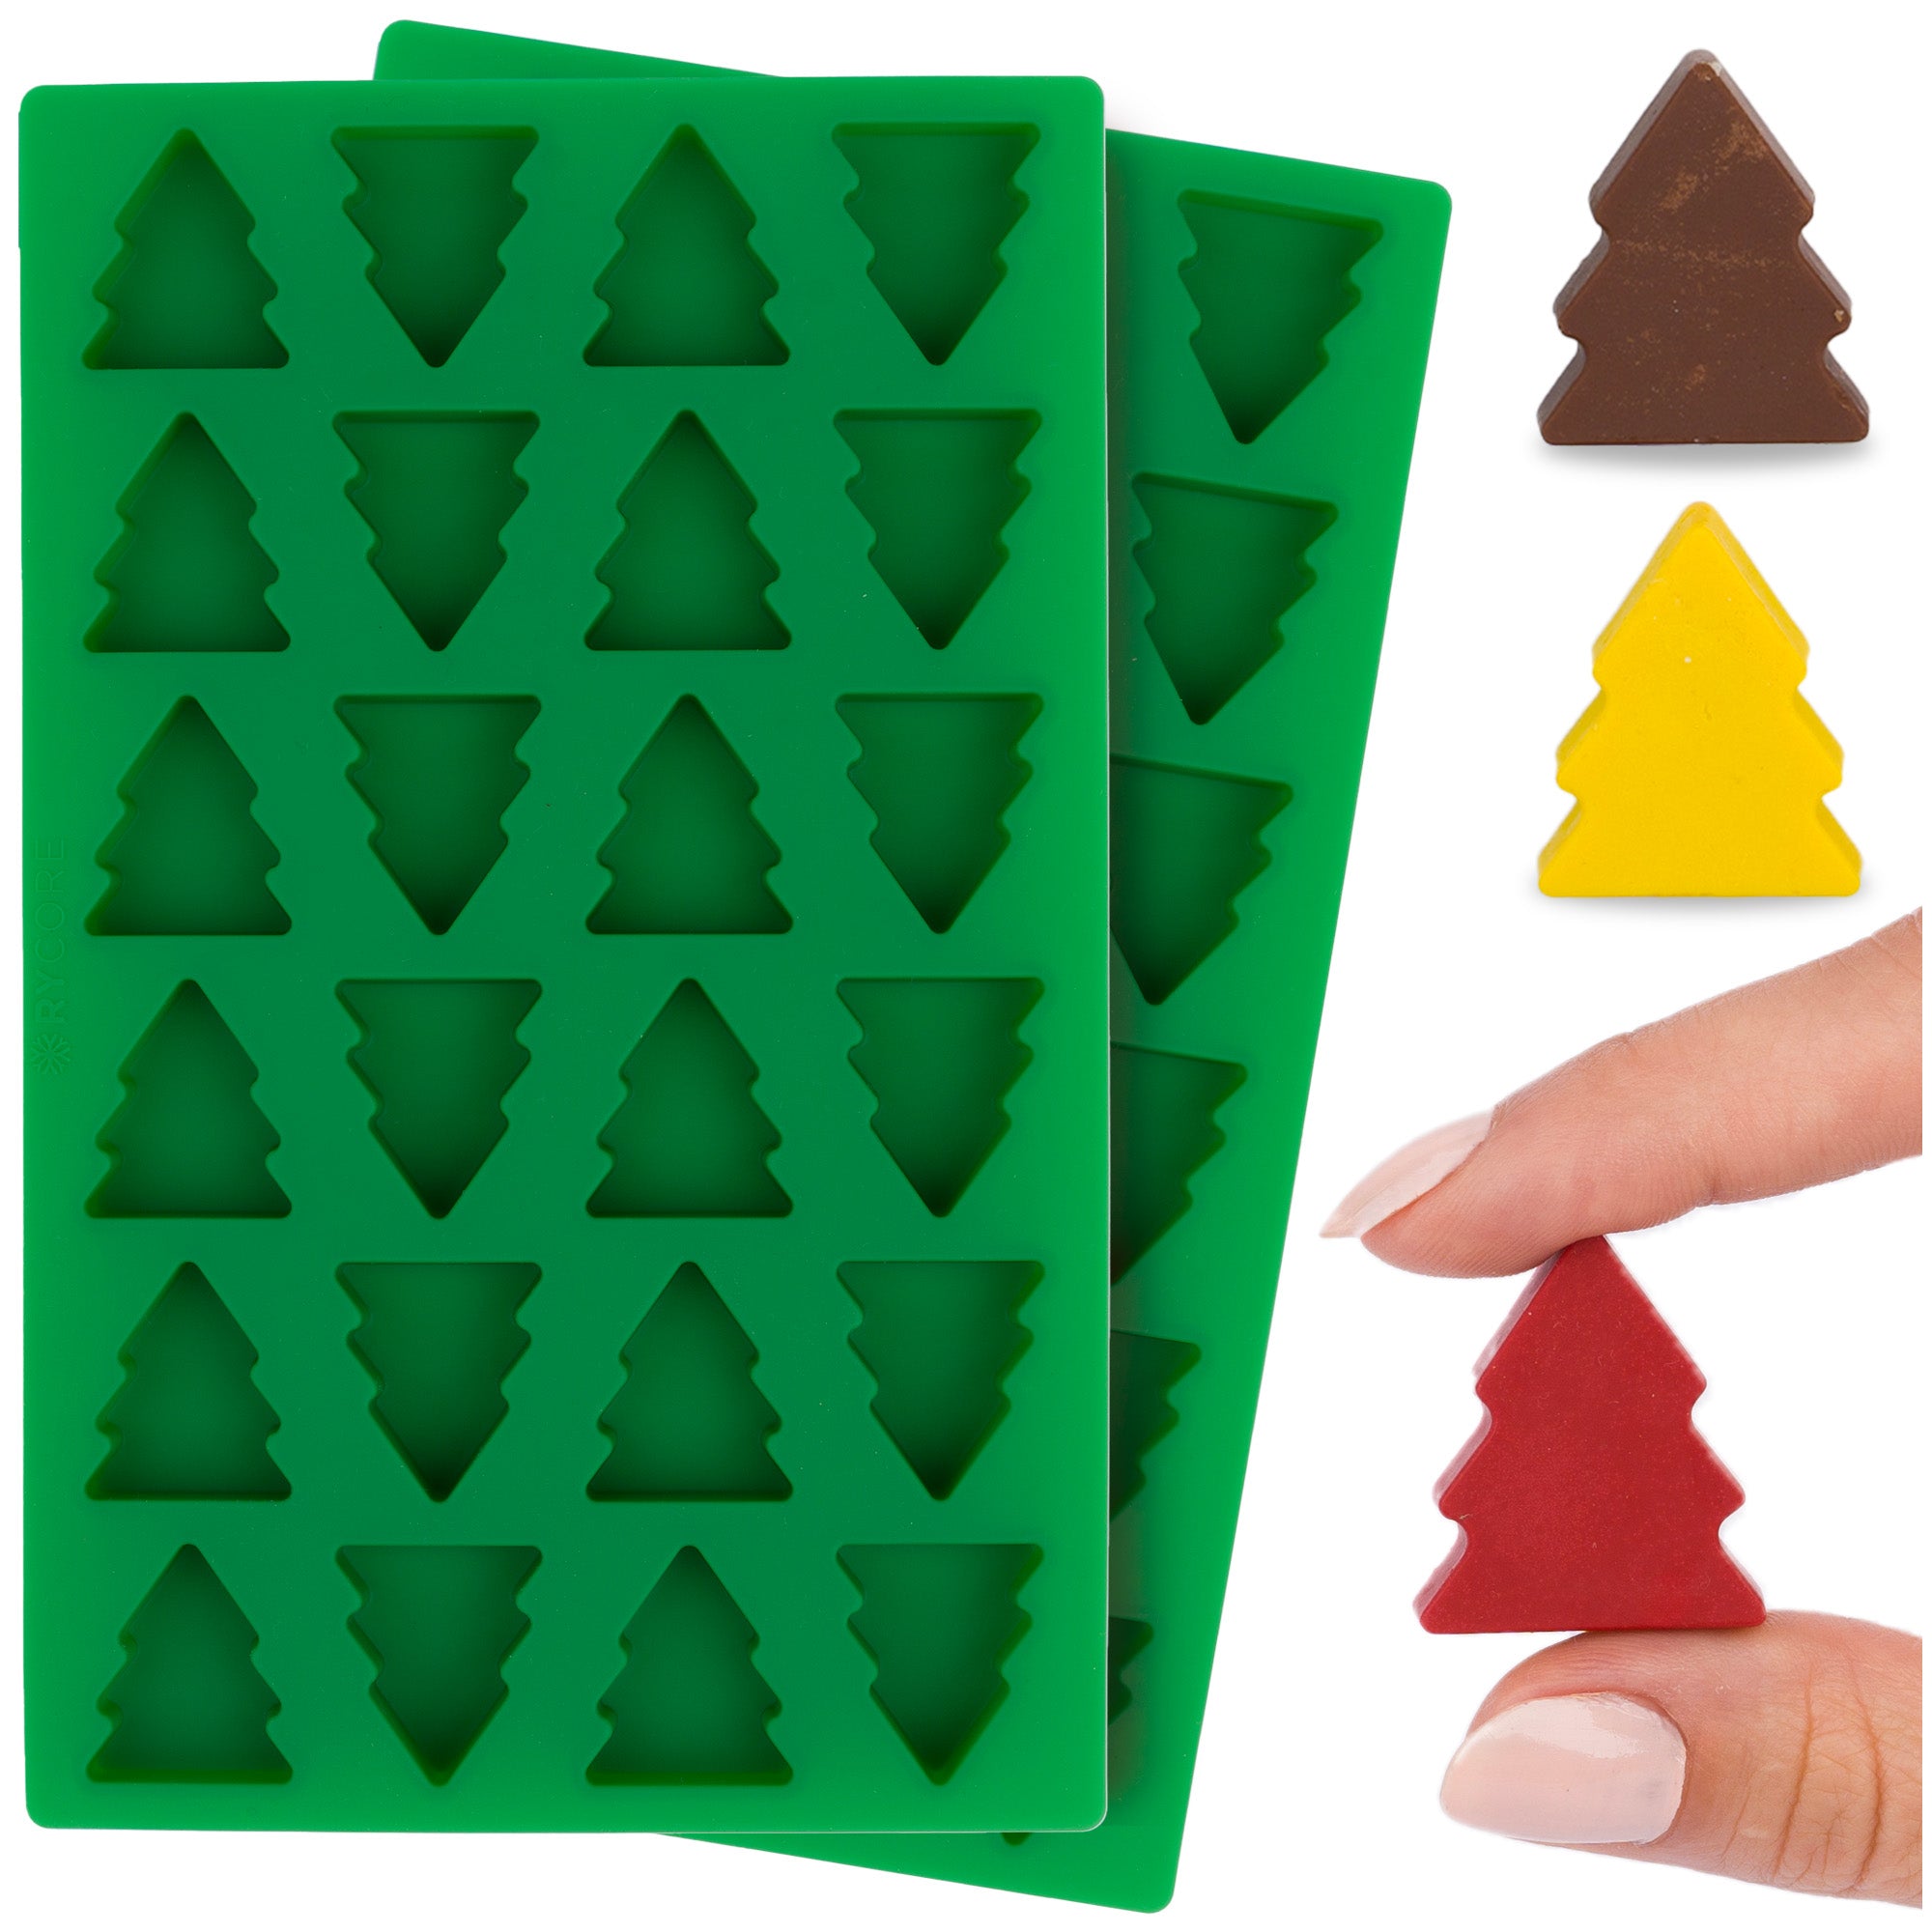 2 Pack - Mini Christmas Tree Silicone Mold for Festive Desserts - Perfect for Chocolates, Candies, Jellies, and Baking Treats - Christmas Tree Chocolate Mold and Baking Essential | Christmas Tree Ice Mold